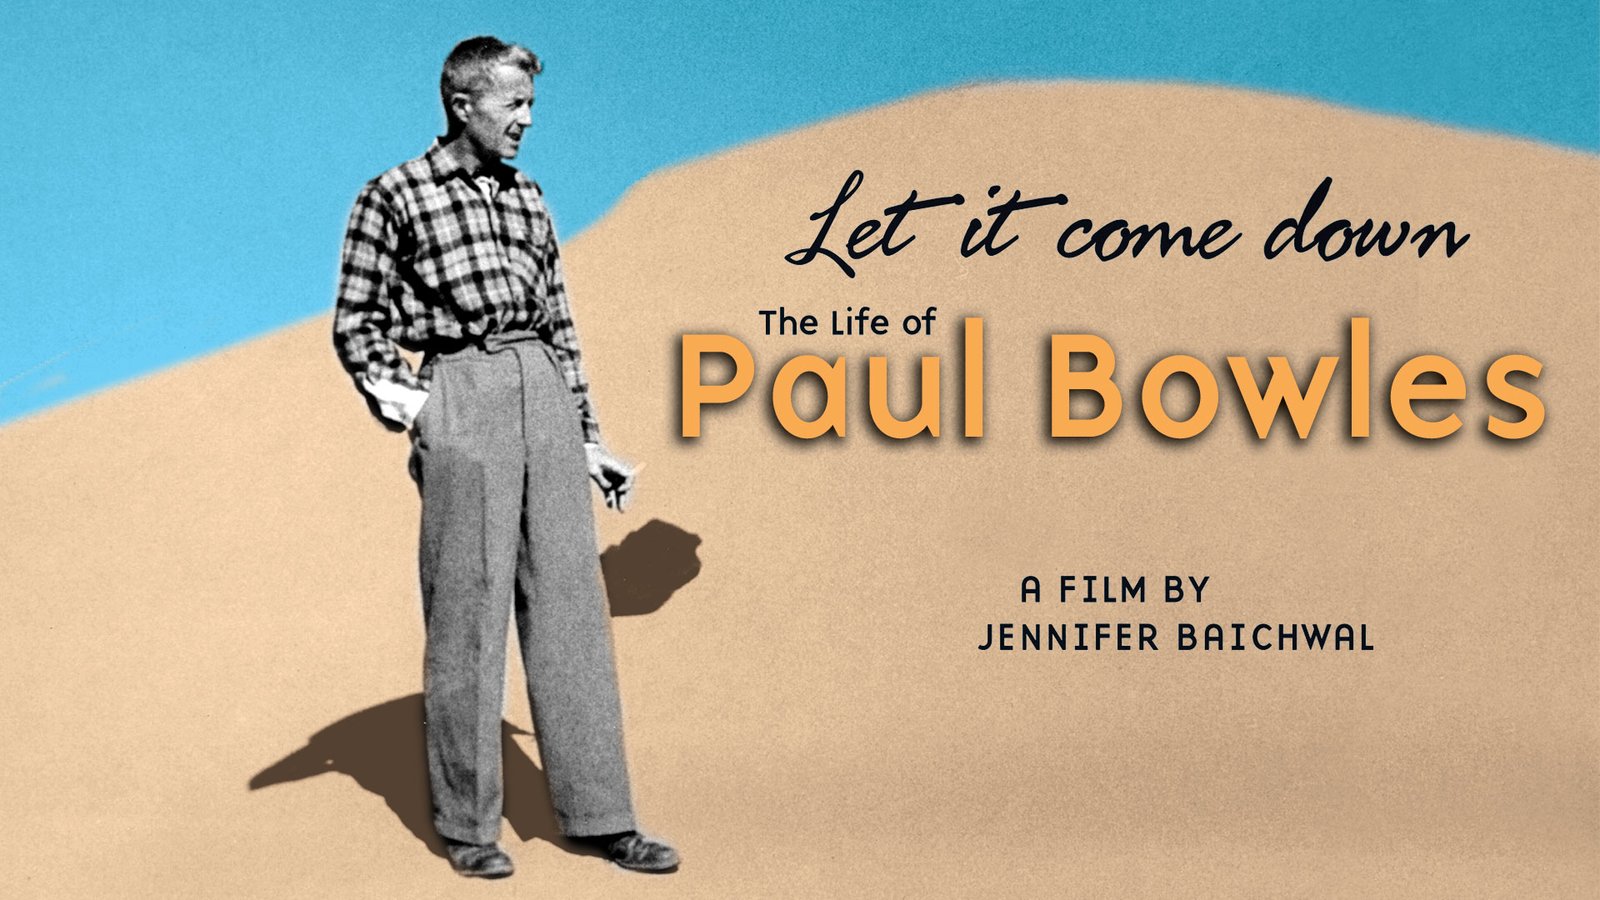 Let It Come Down - The Life of Paul Bowles